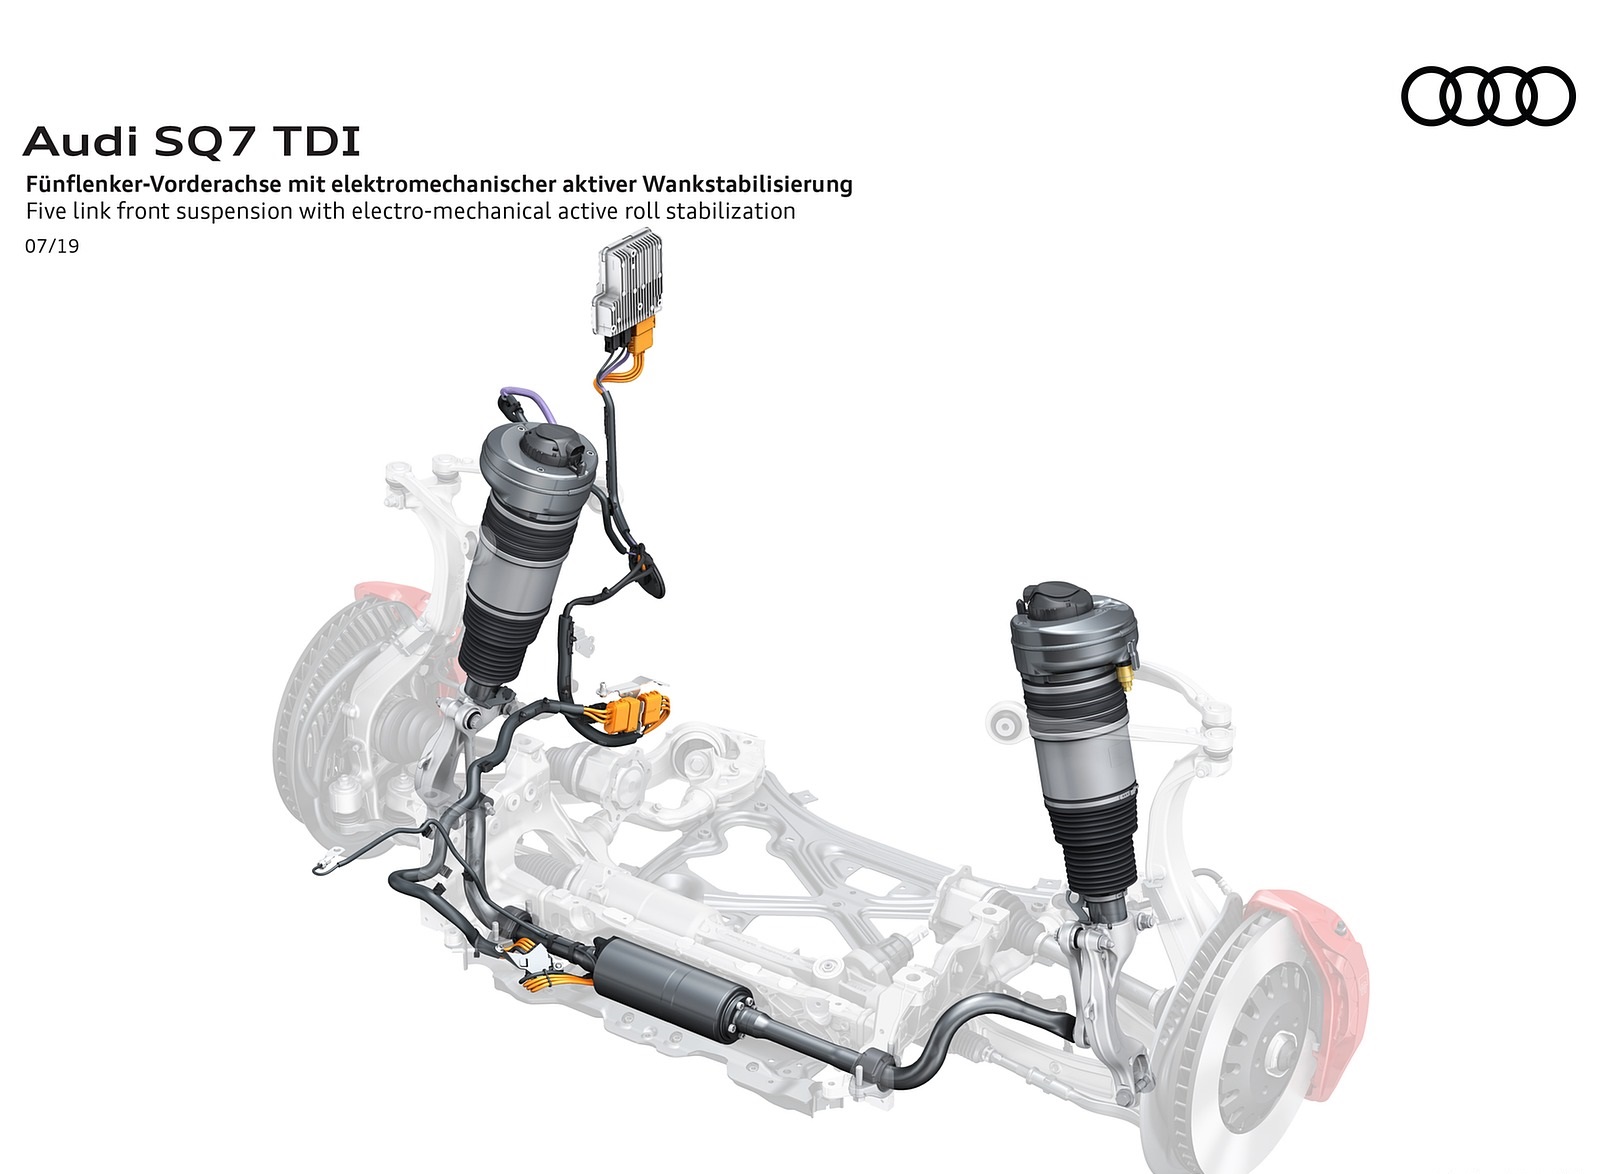 2020 Audi SQ7 TDI Five link front suspension with allwheel stearing and electro-mechanical aktive roll stabilization Wallpapers #136 of 140